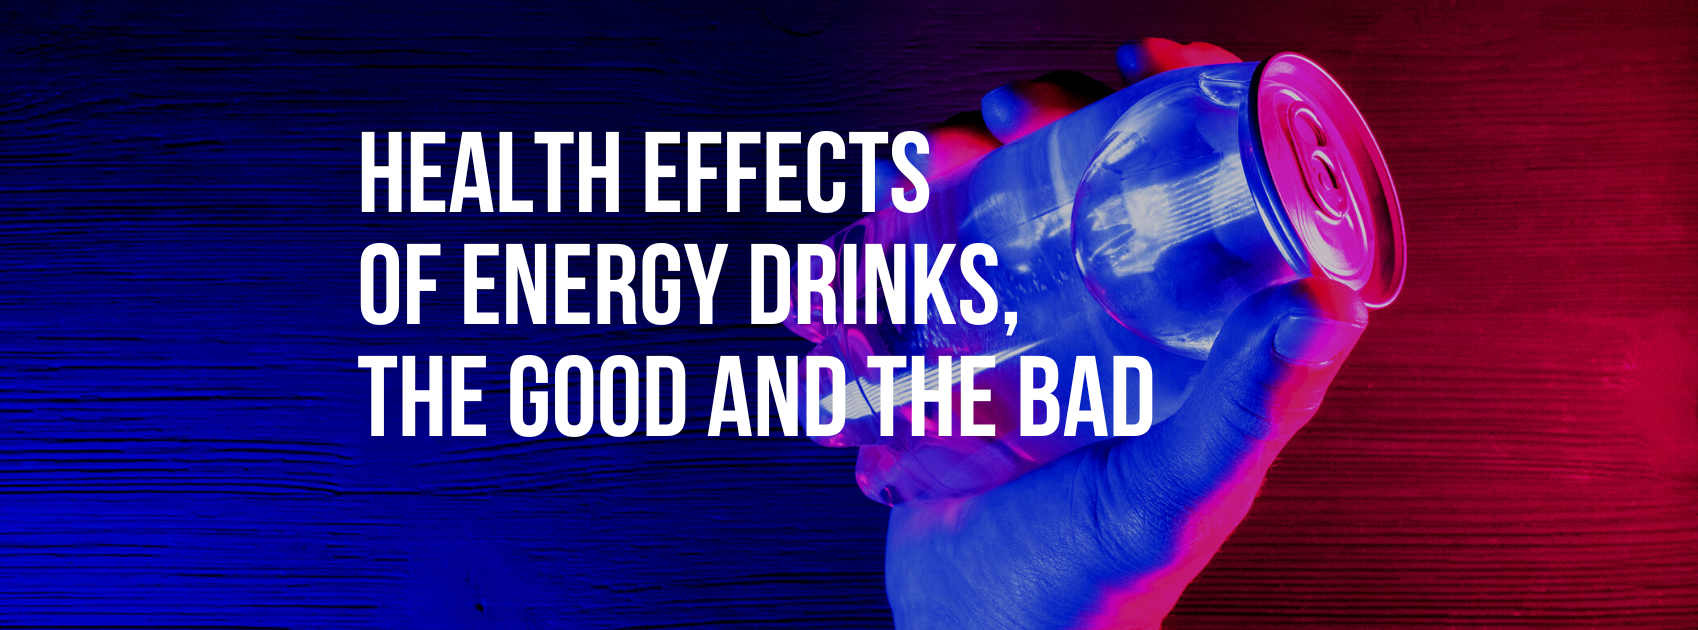 Health Effects of Energy Drinks, The Good and The Bad